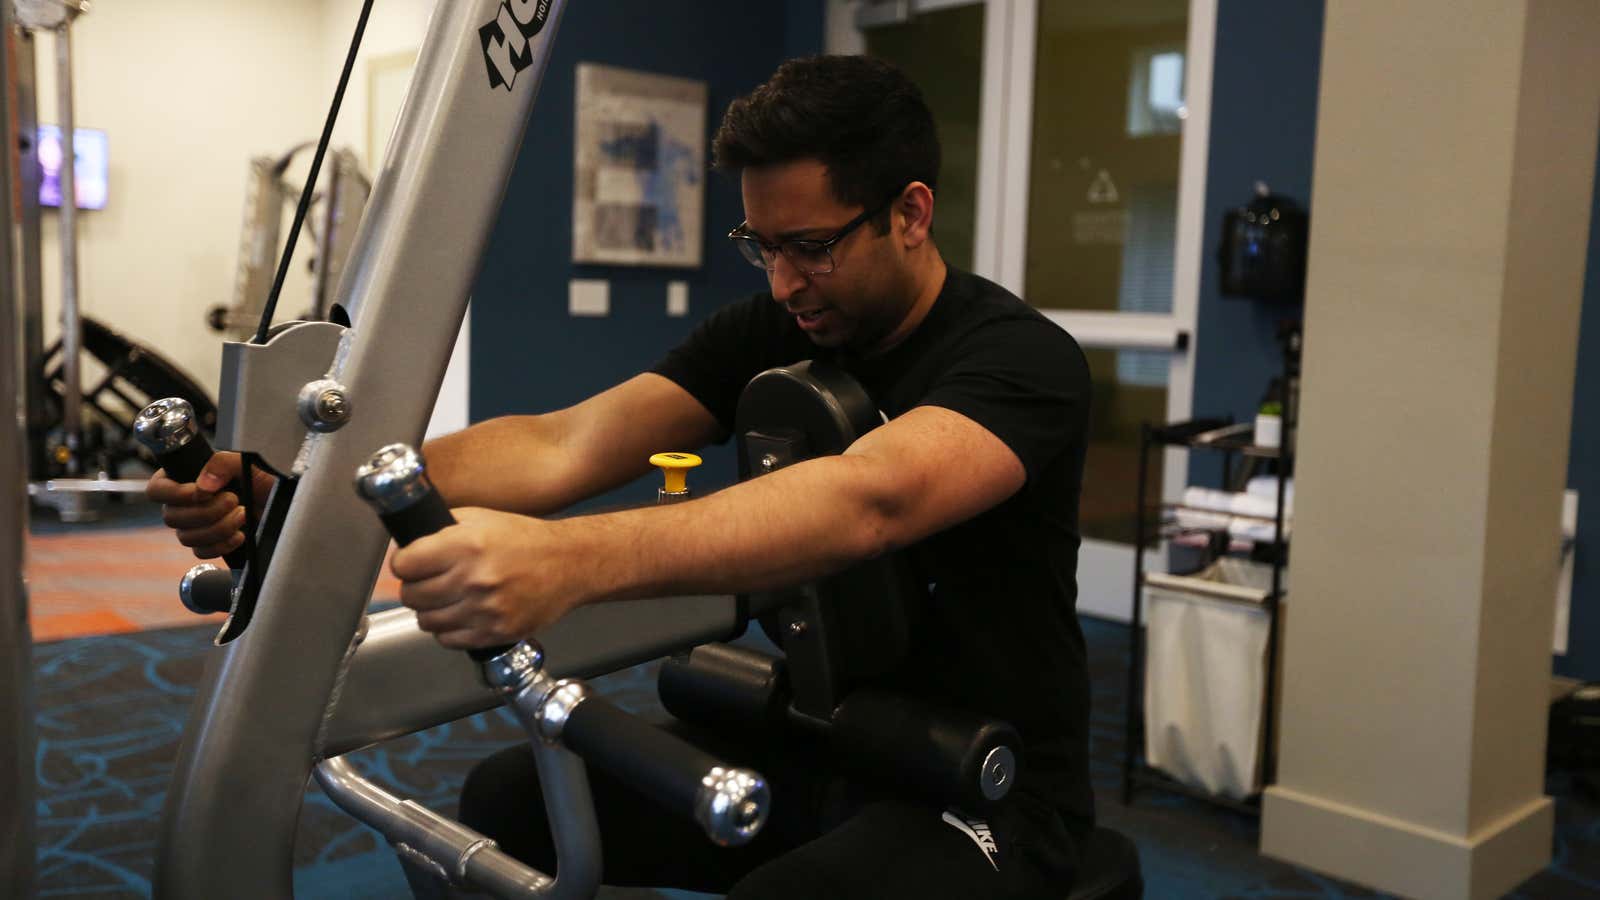 ShahZaM, an esports player on compLexity, works out at his apartment gym.